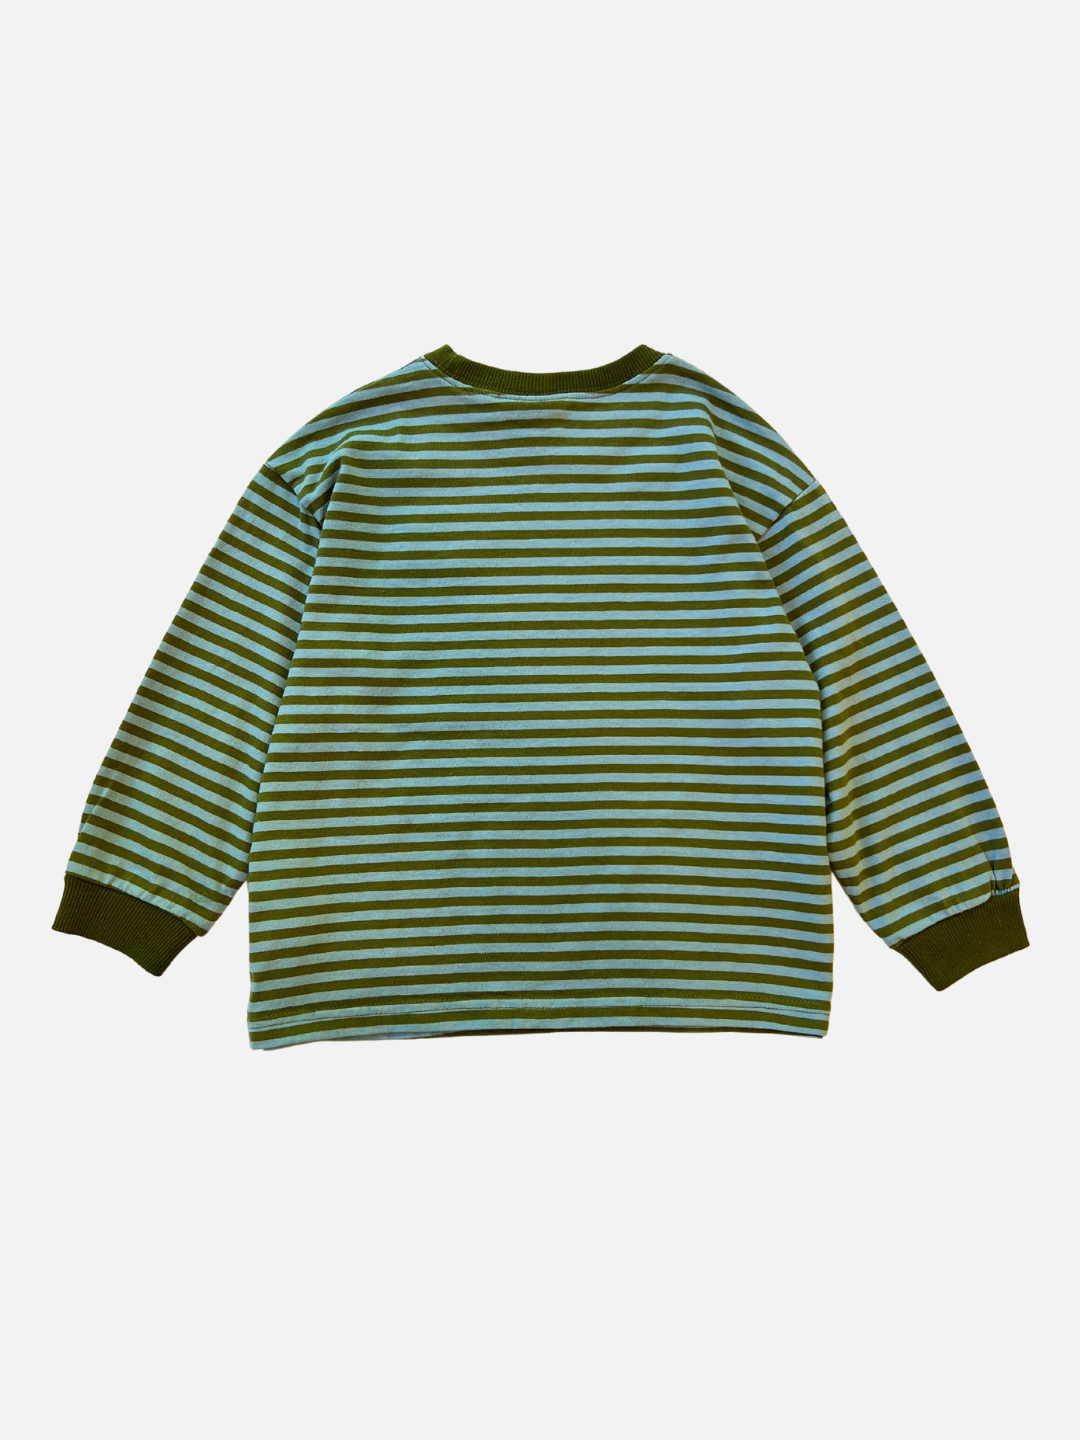 Comma Striped Longsleeve in Sky/Olive back view